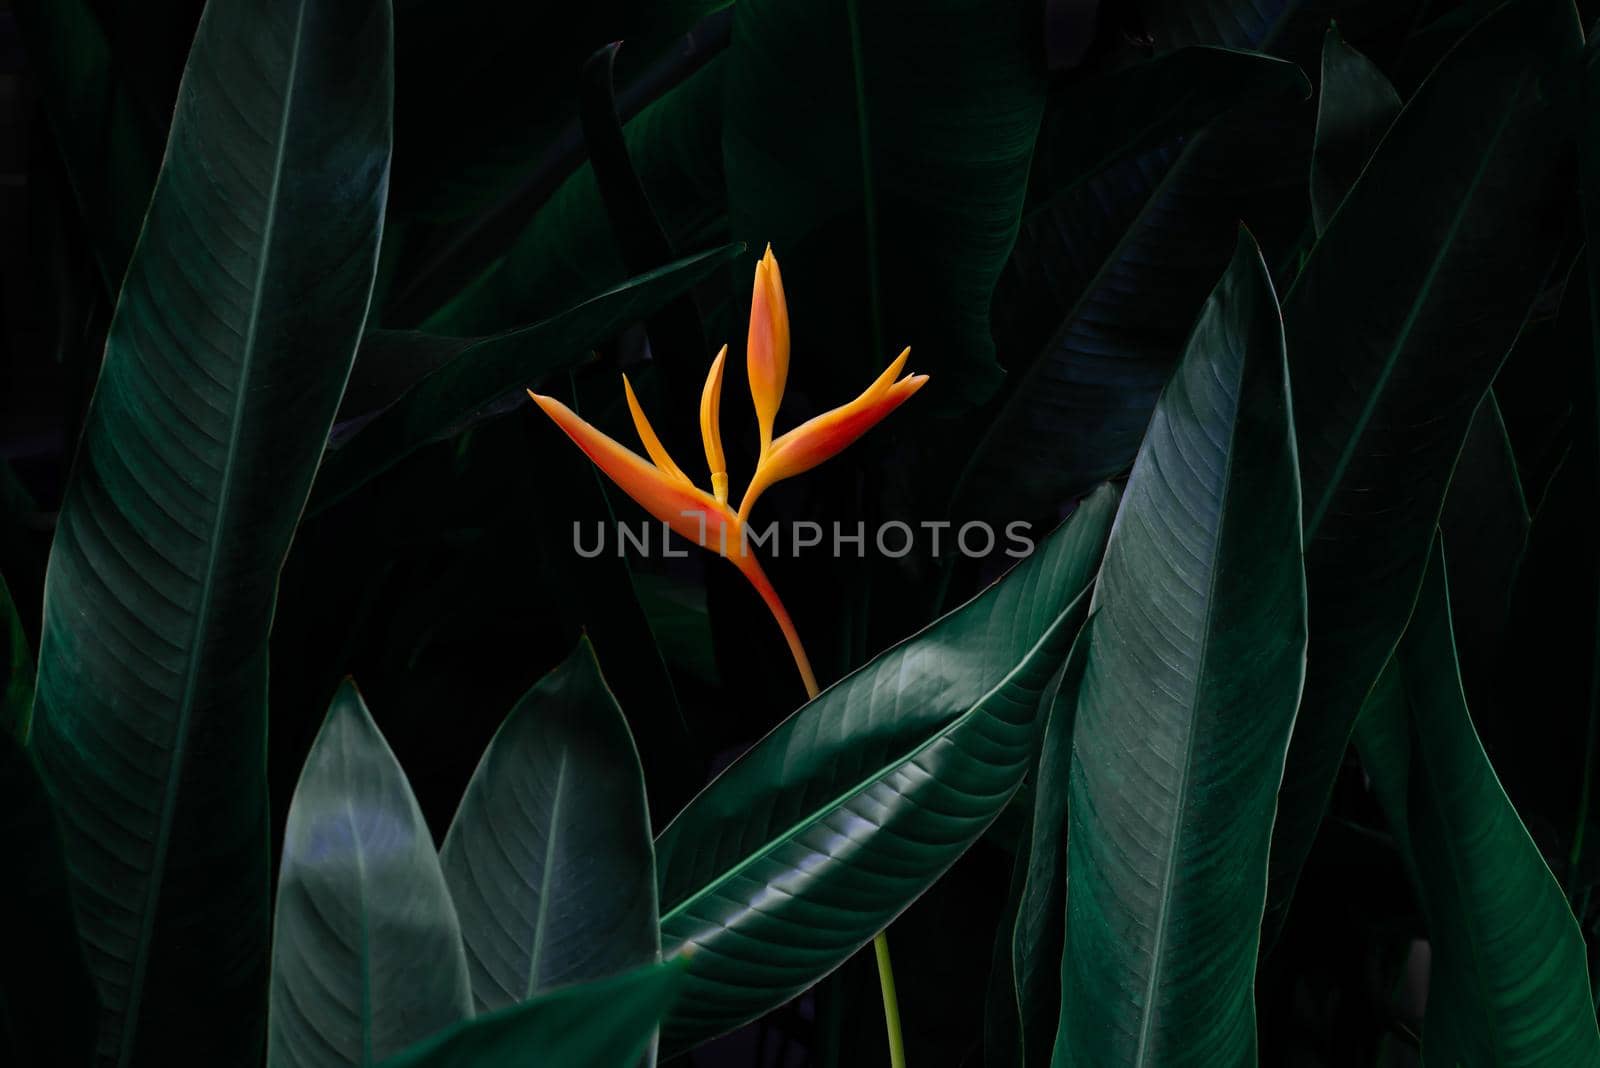 exotic flower on dark green tropical foliage nature background.